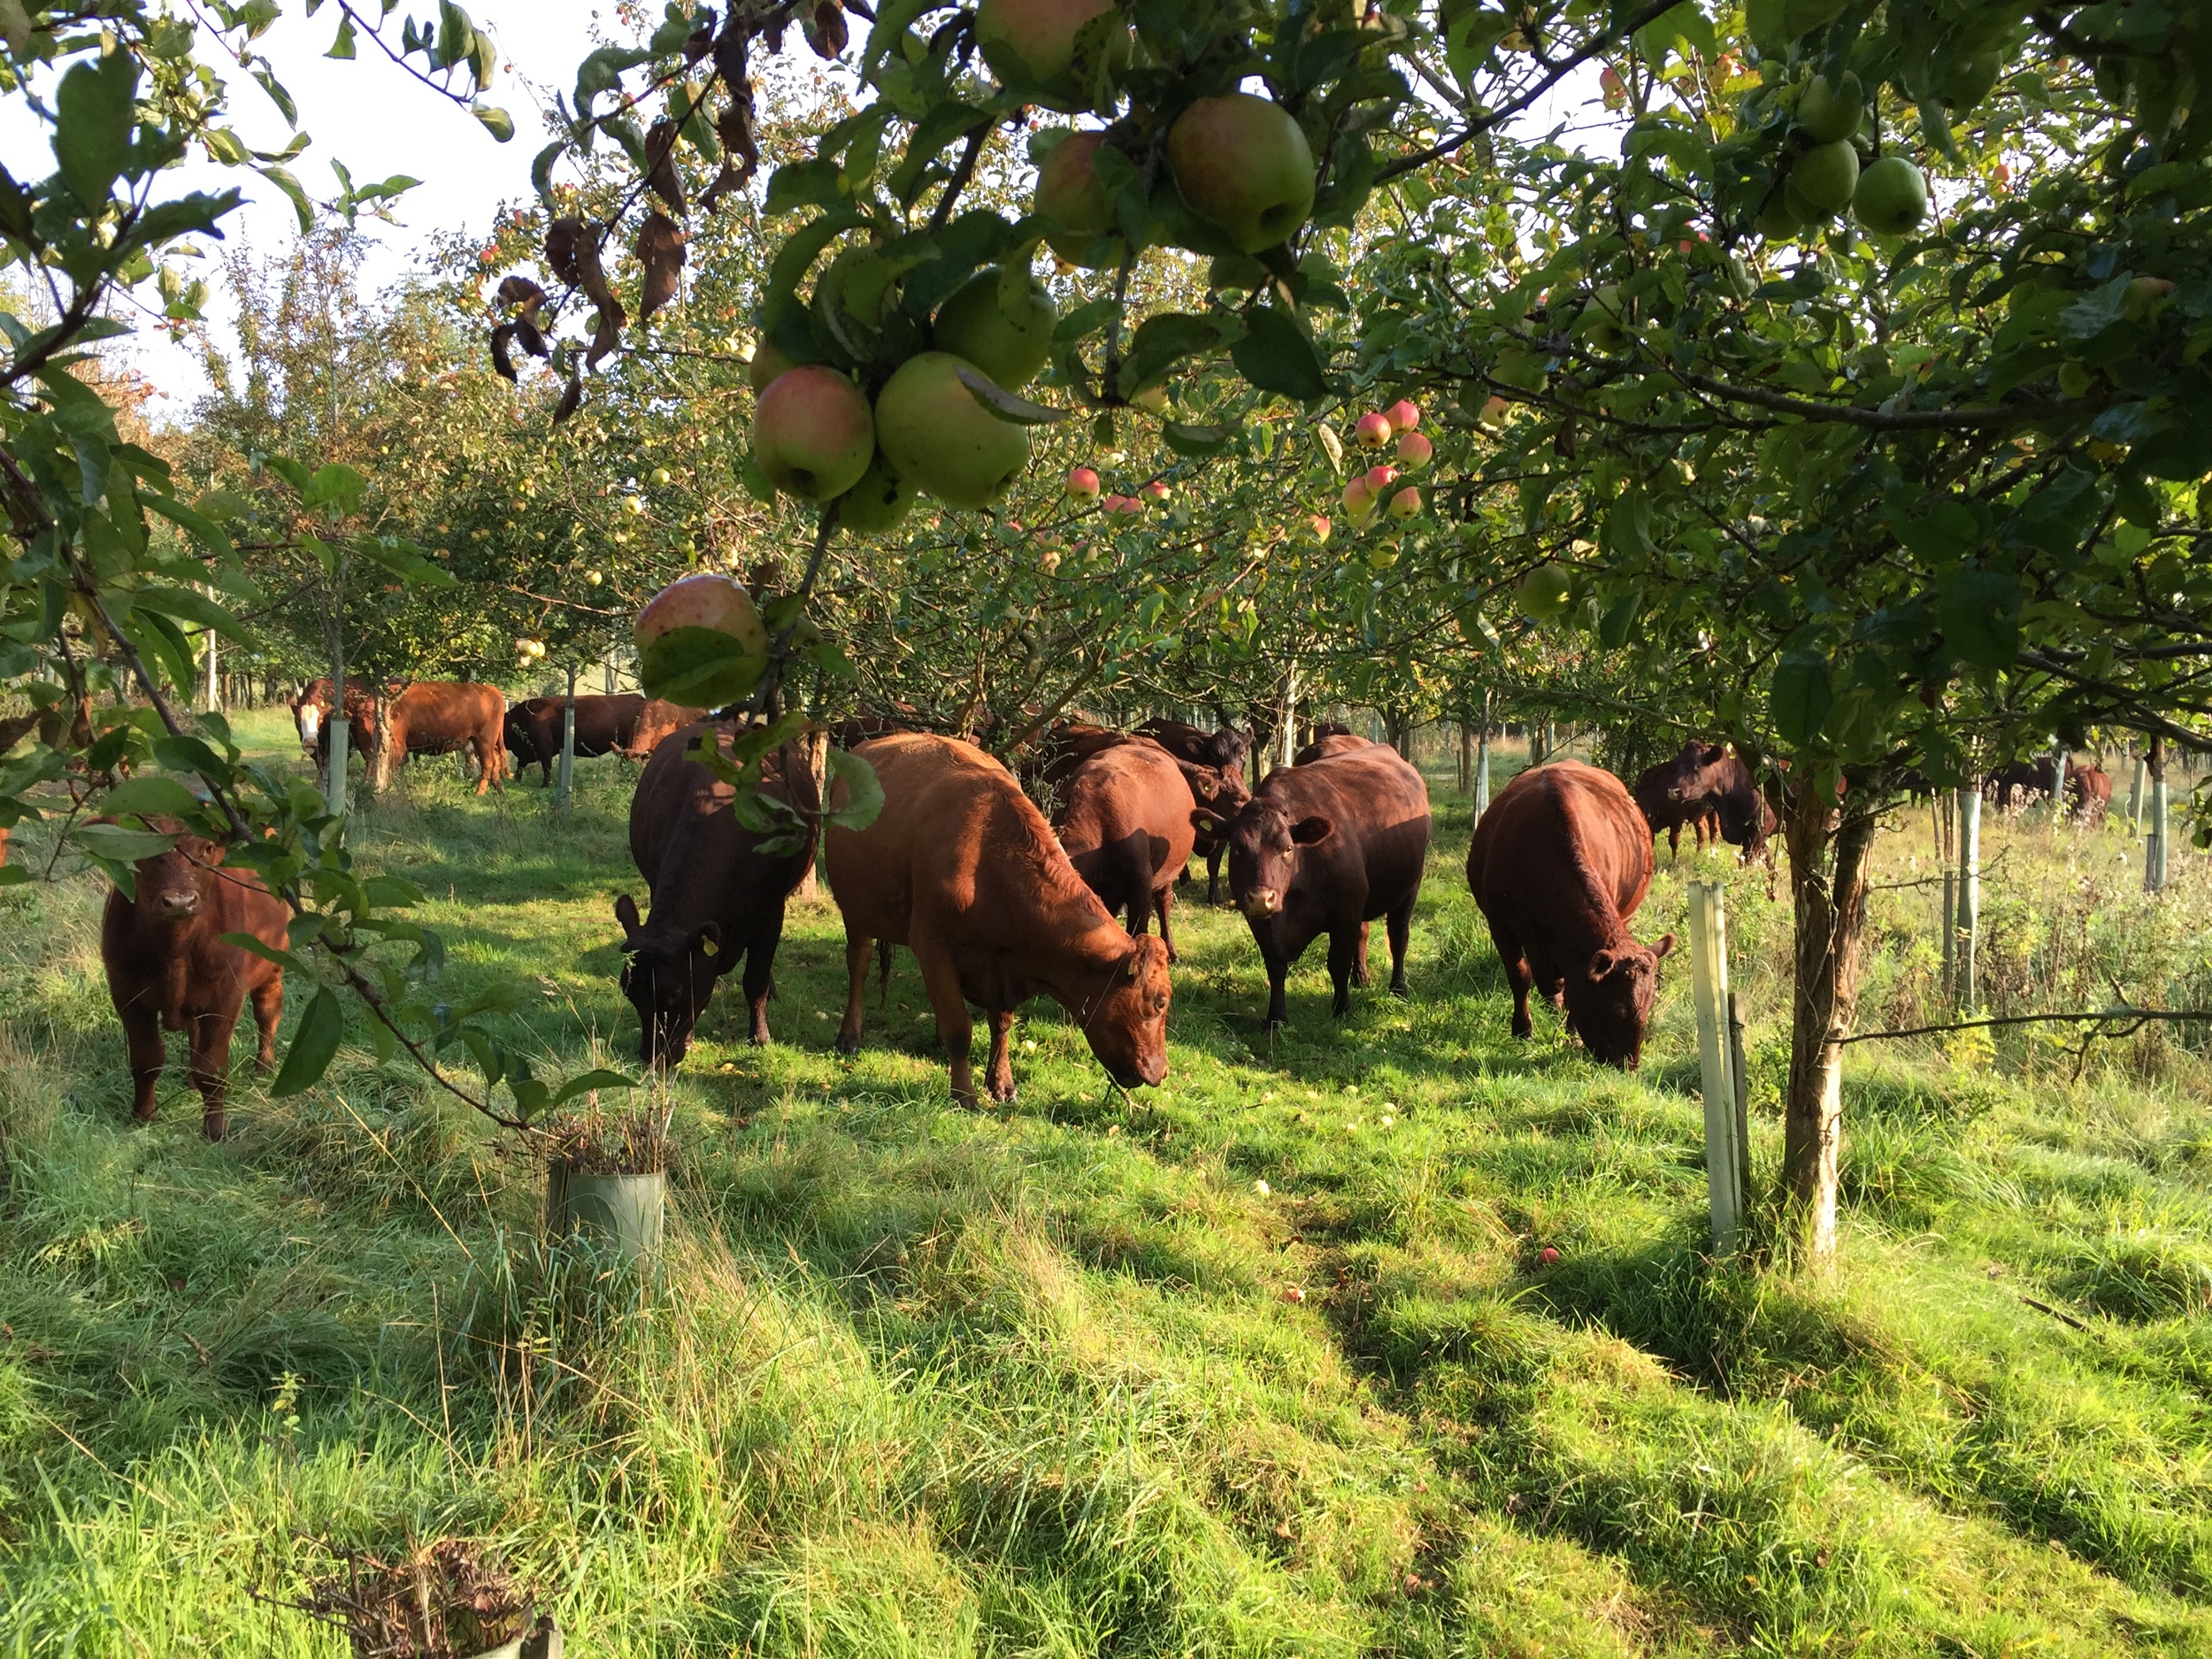 Cattle moving slowly through an apple orchard